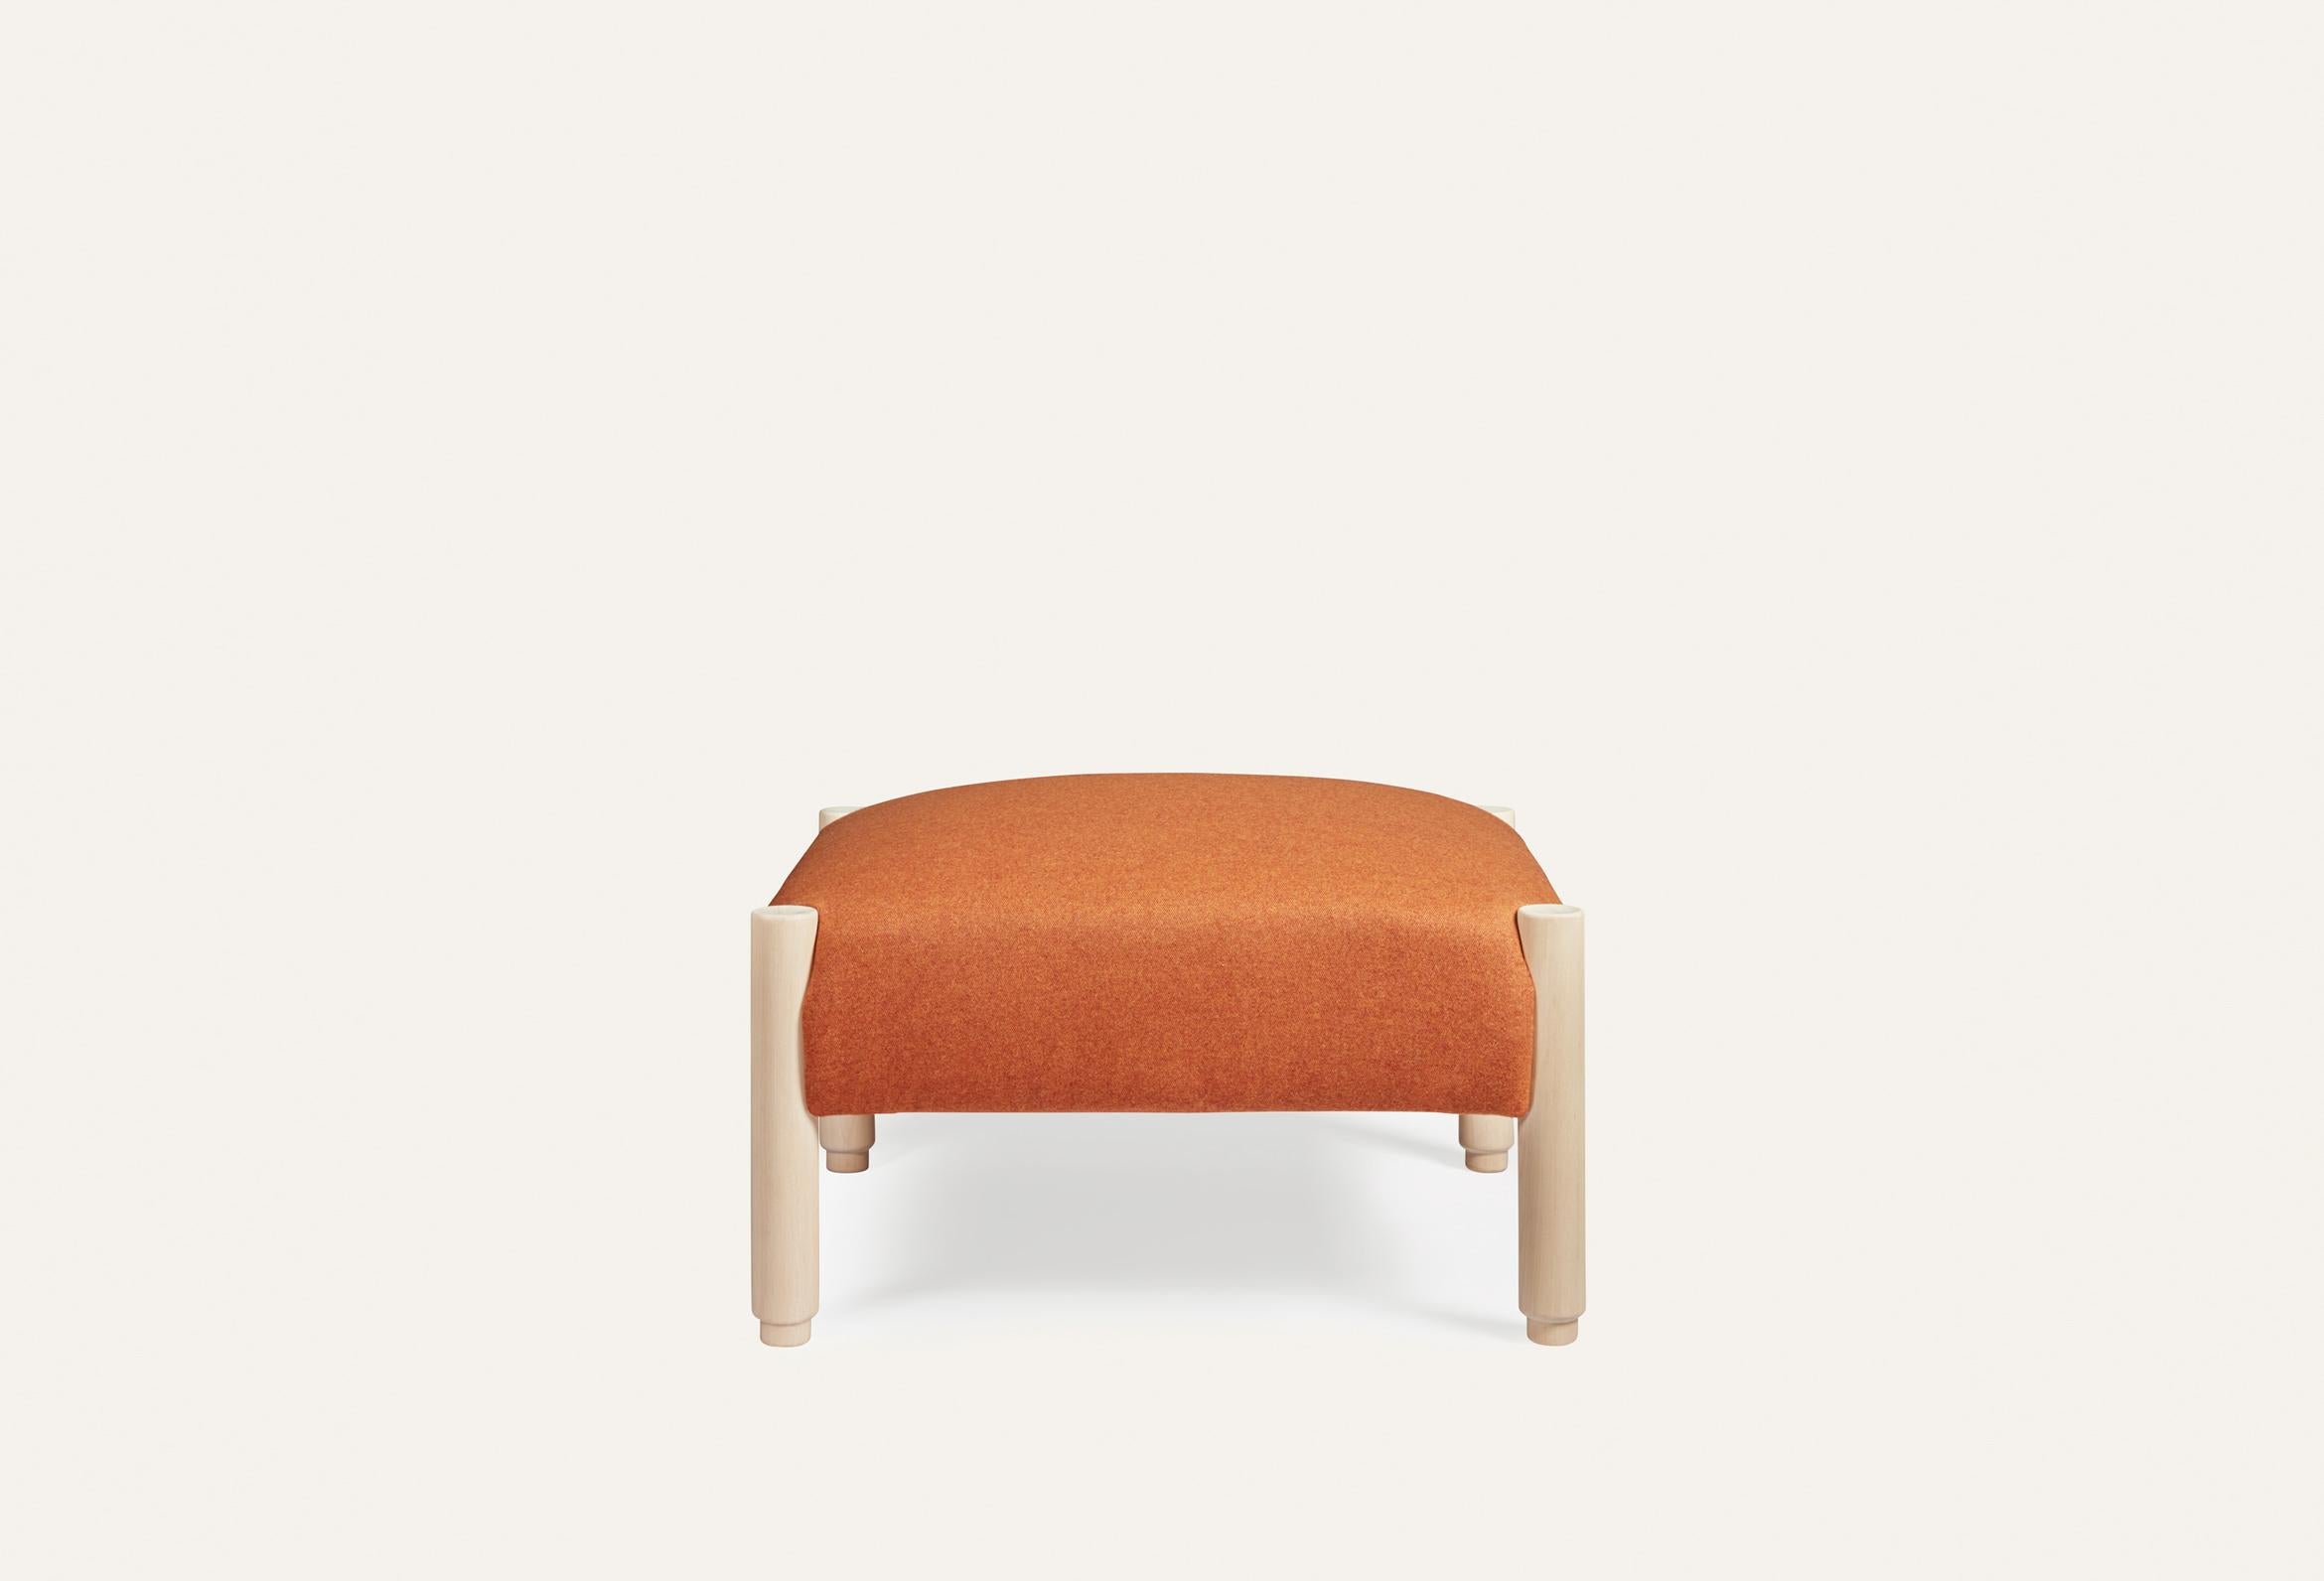 Natural Stand By Me pouf by Storängen Design
Dimensions: D 74 x W 74 x H 42 cm
Materials: birch wood, fabric.
Available in other colors and fabrics.
Available to convine with Stand By Me modules: corner section, middle section and pouf.

A